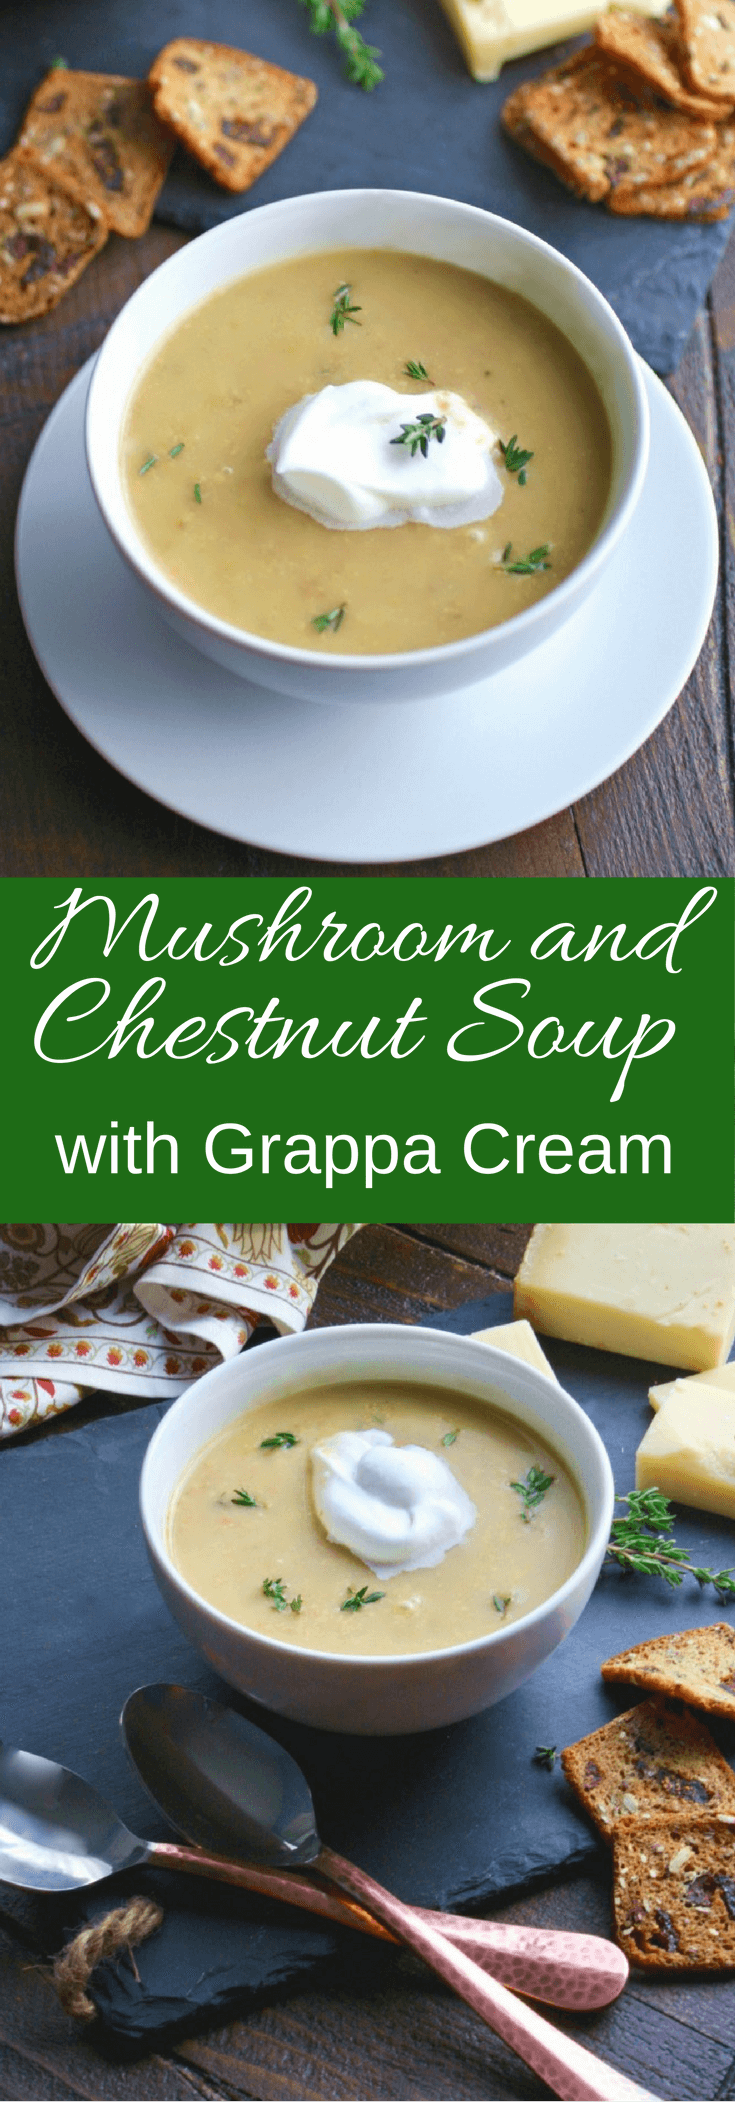 What a treat! Mushroom and Chestnut Soup with Grappa Cream is a flavorful soup fit for an elegant meal!